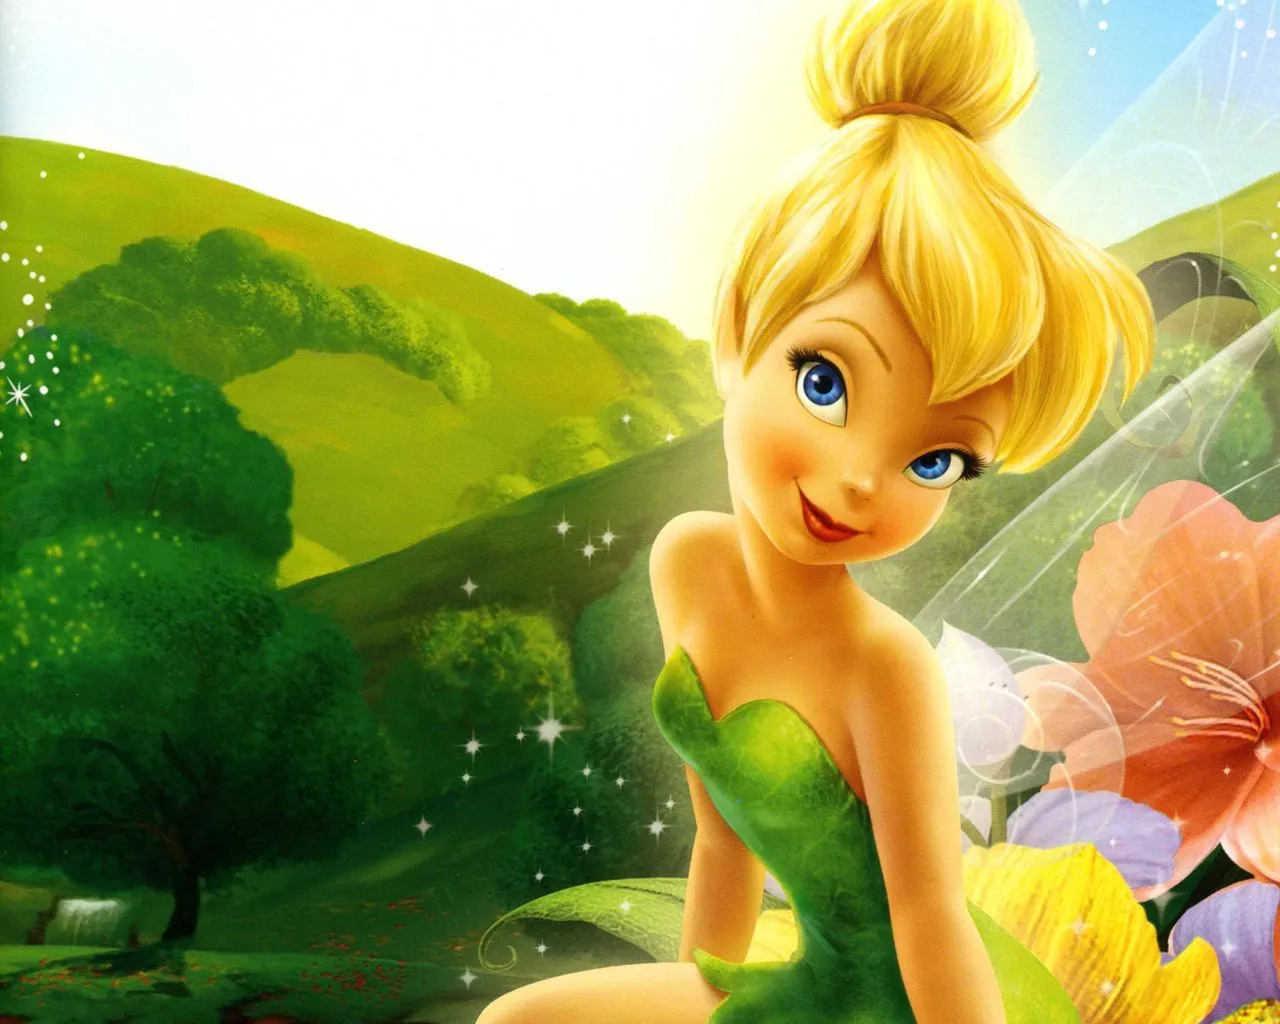 Find yourself a great Tinkerbell wallpaper with the Disney fairies ...